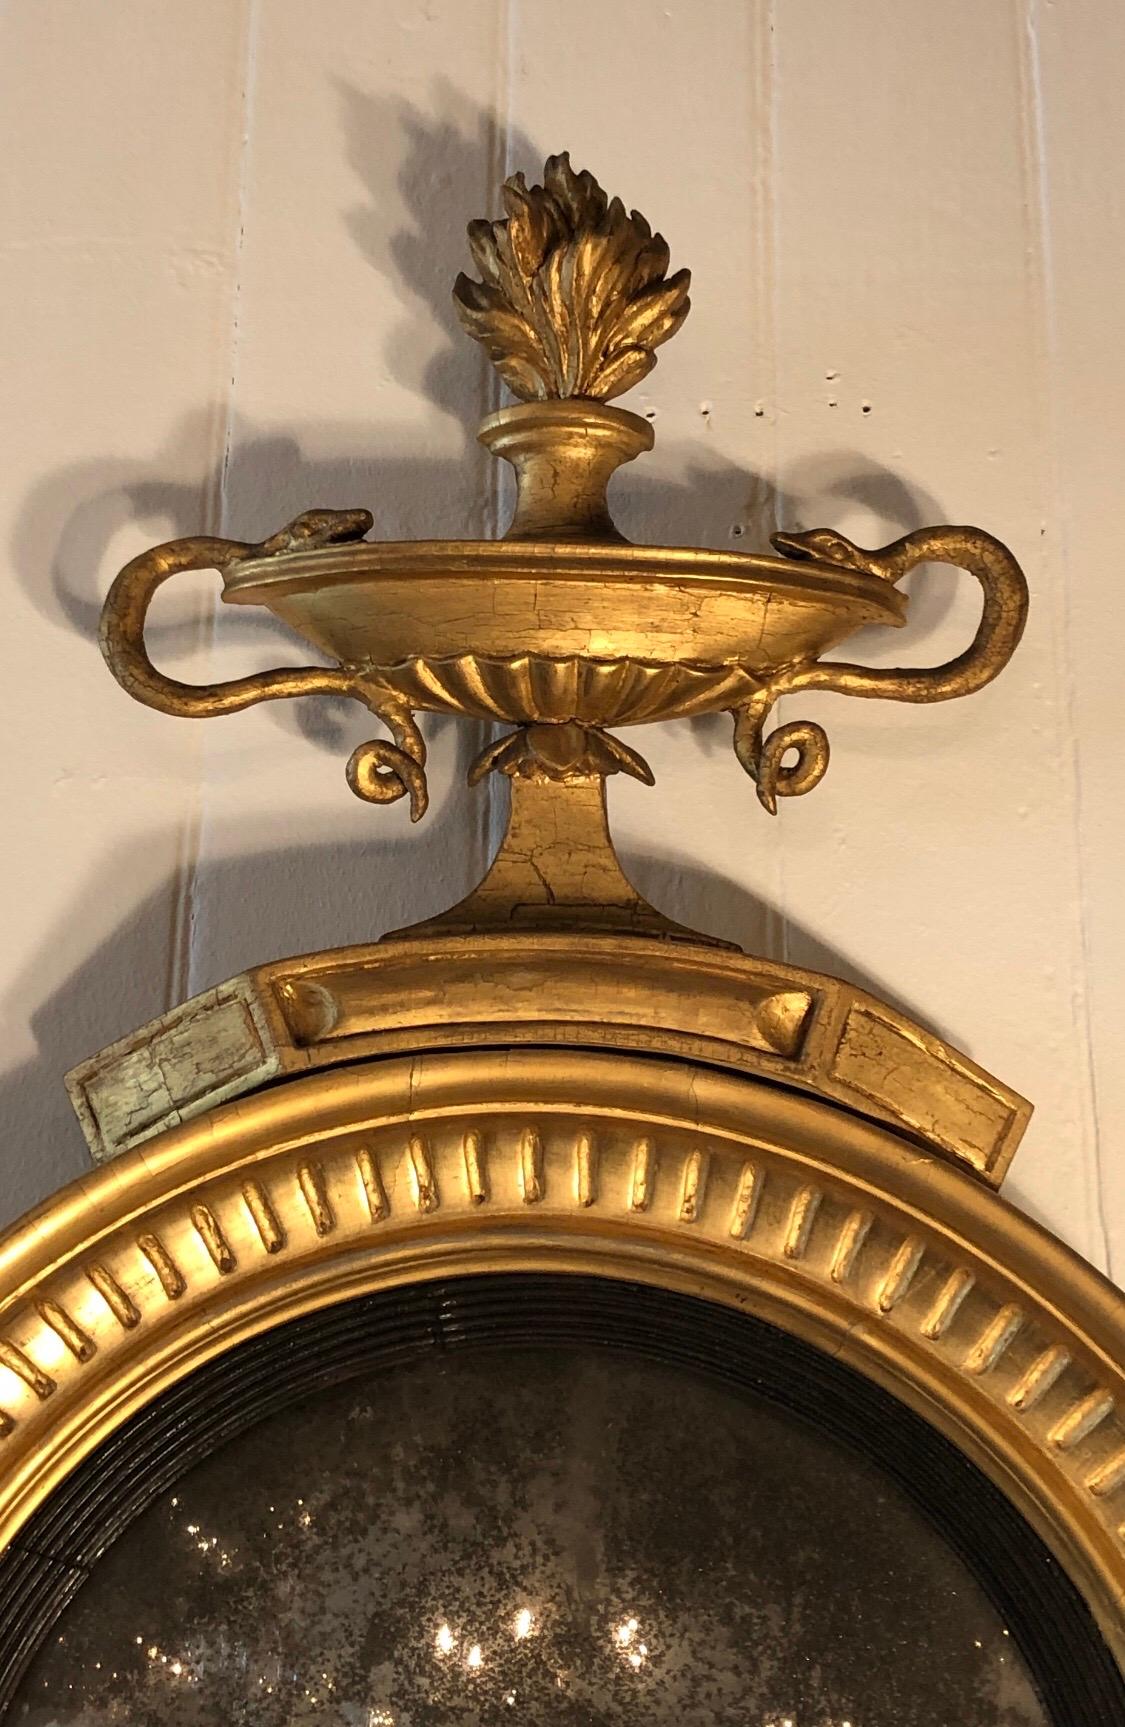 This exquisite English Regency girandole mirror has a classical double handle snake urn with flames. This British mirror has fluting and an ebonized reeded wood ring framing the convex mirror. The bottom has girandole arms flanking oak leaves. The